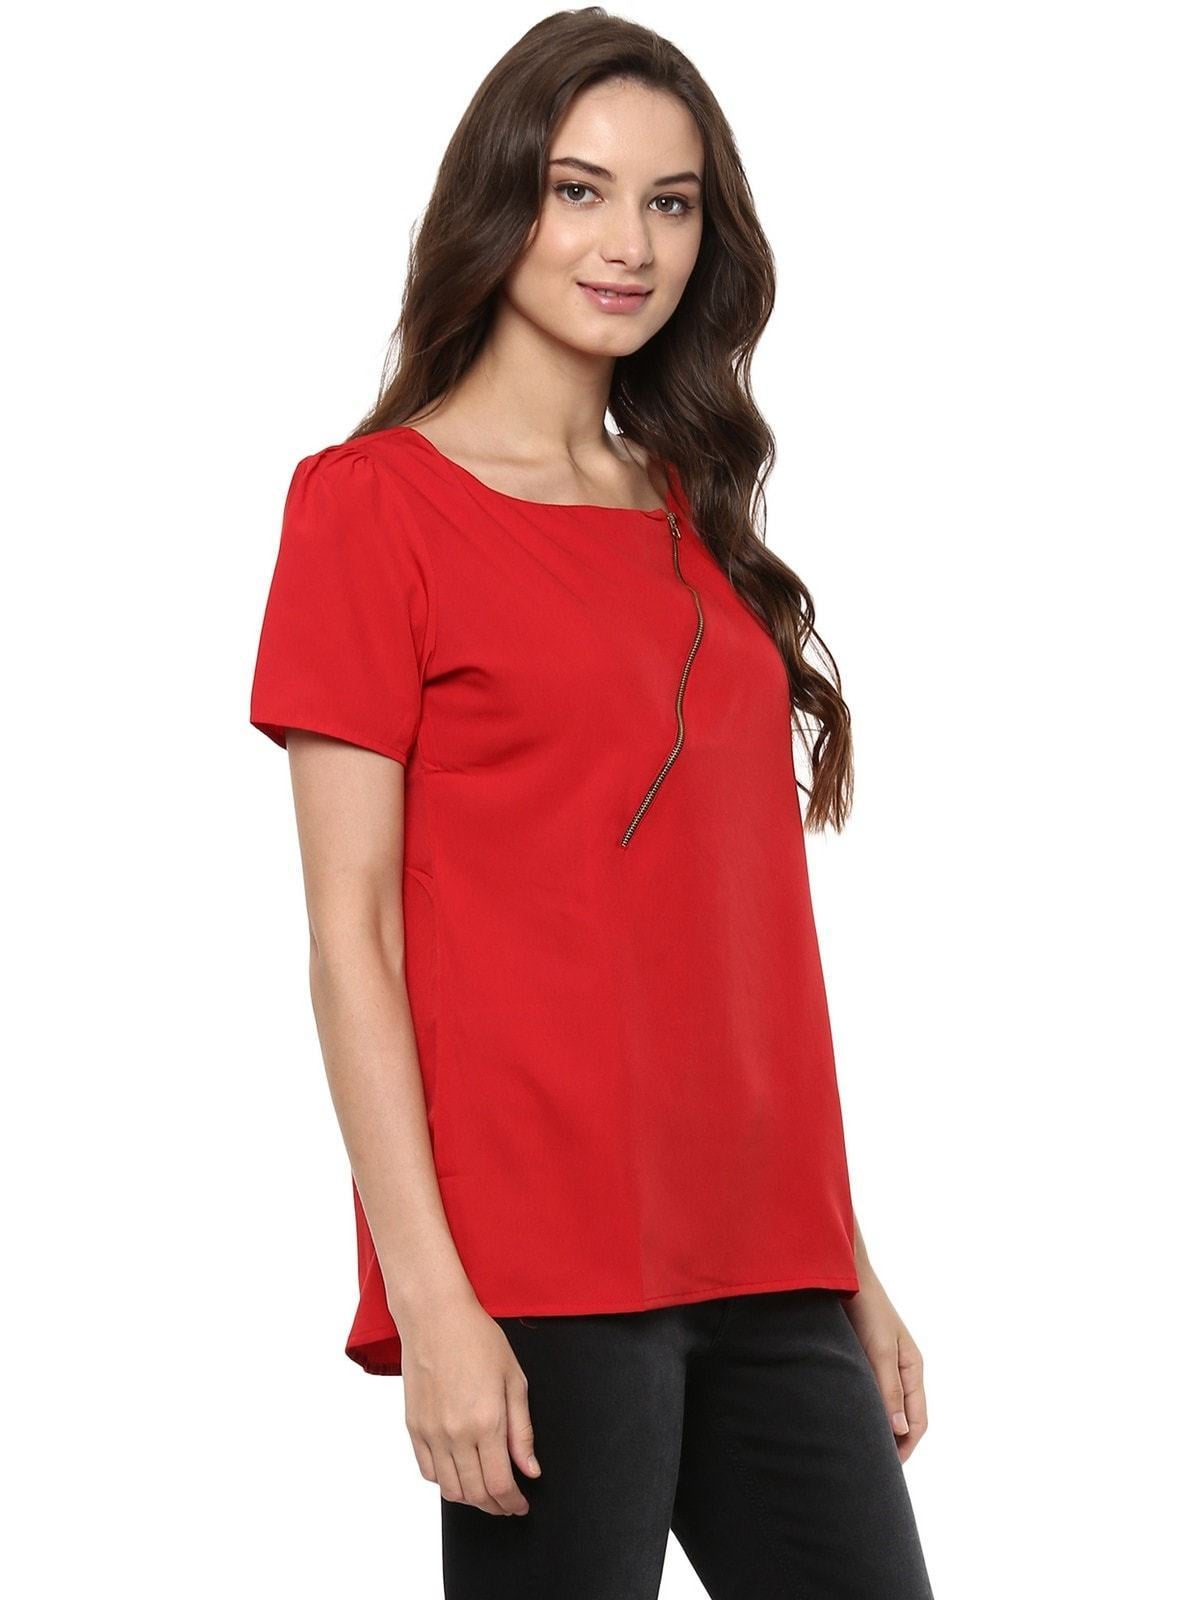 Women's Top Detailed With Gathered Sleeves And Diagonal Zip - Pannkh